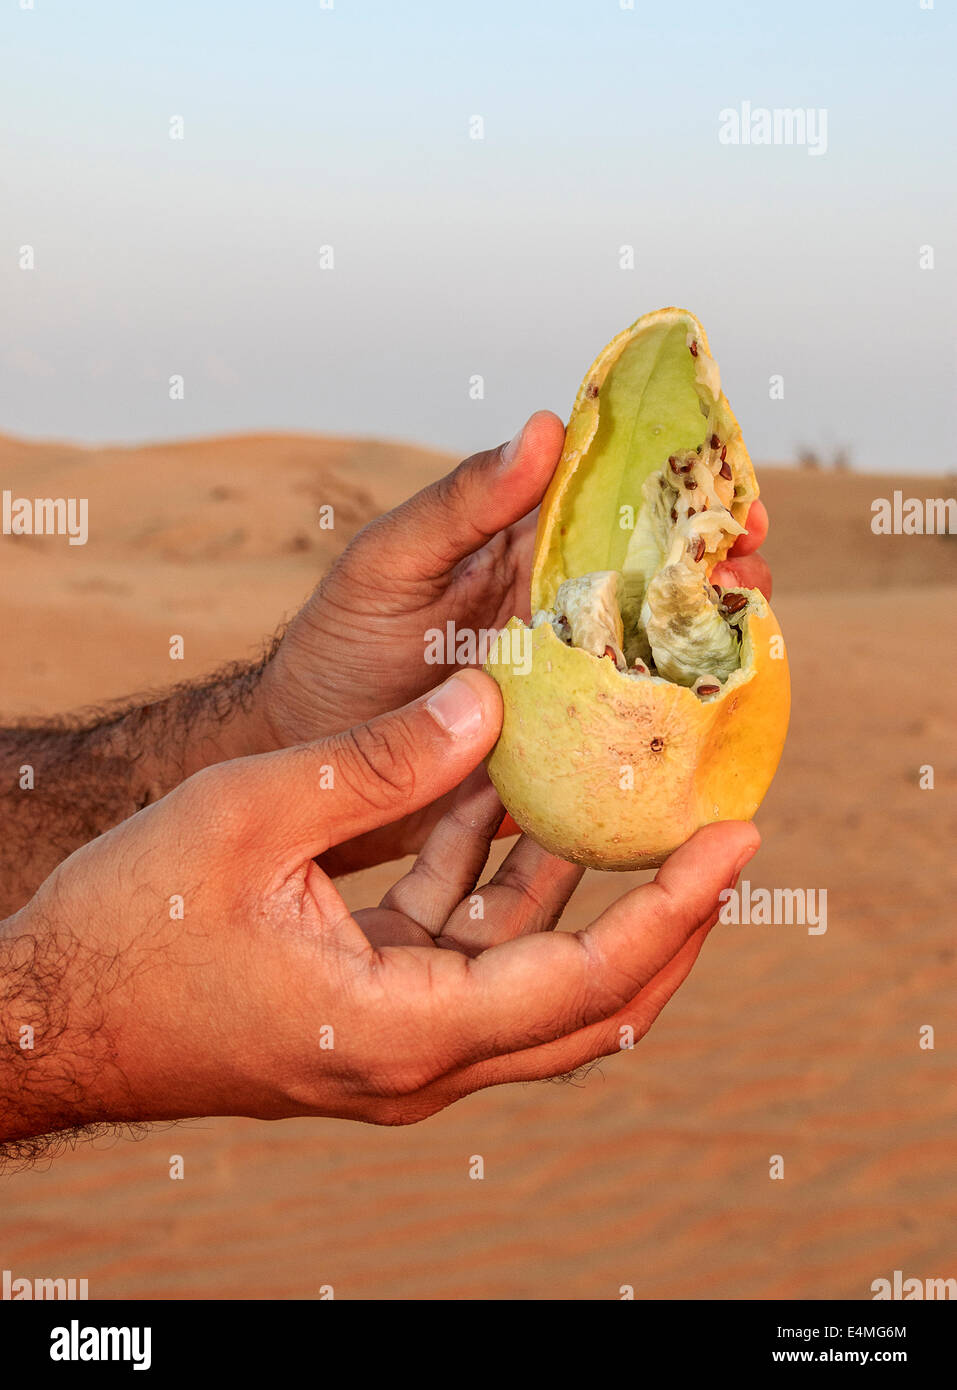 Desert gourd (Citrullus colocynthis, also called desert scotch, a desert scrub fruit used as medicine by Bedouins Stock Photo